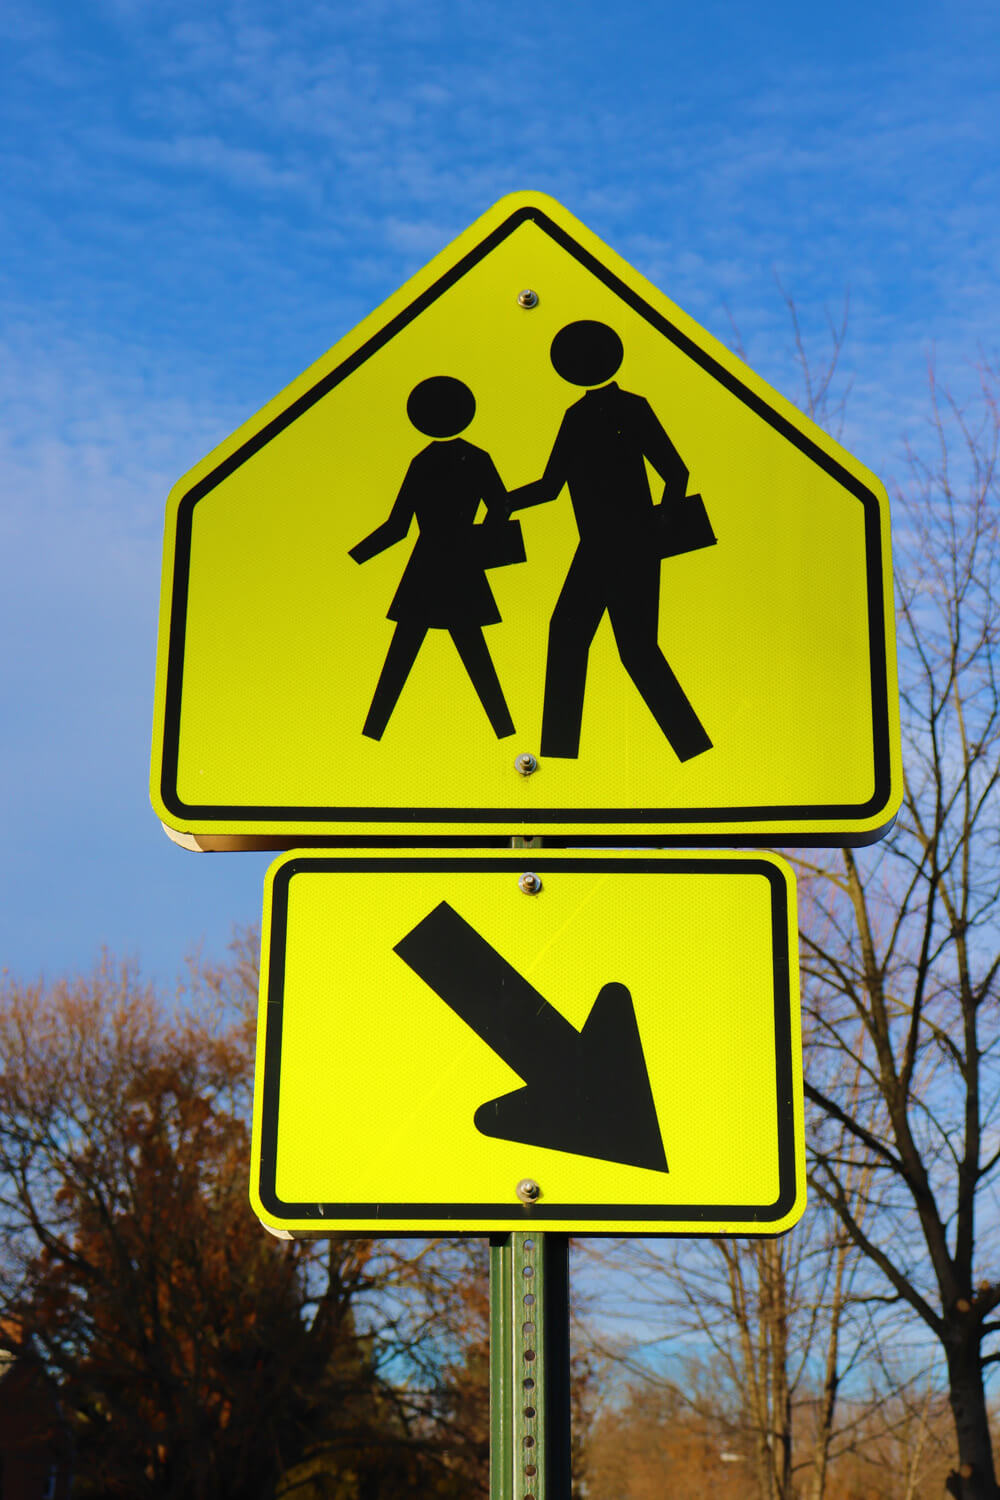 School Crossing Sign: What Does it Mean?